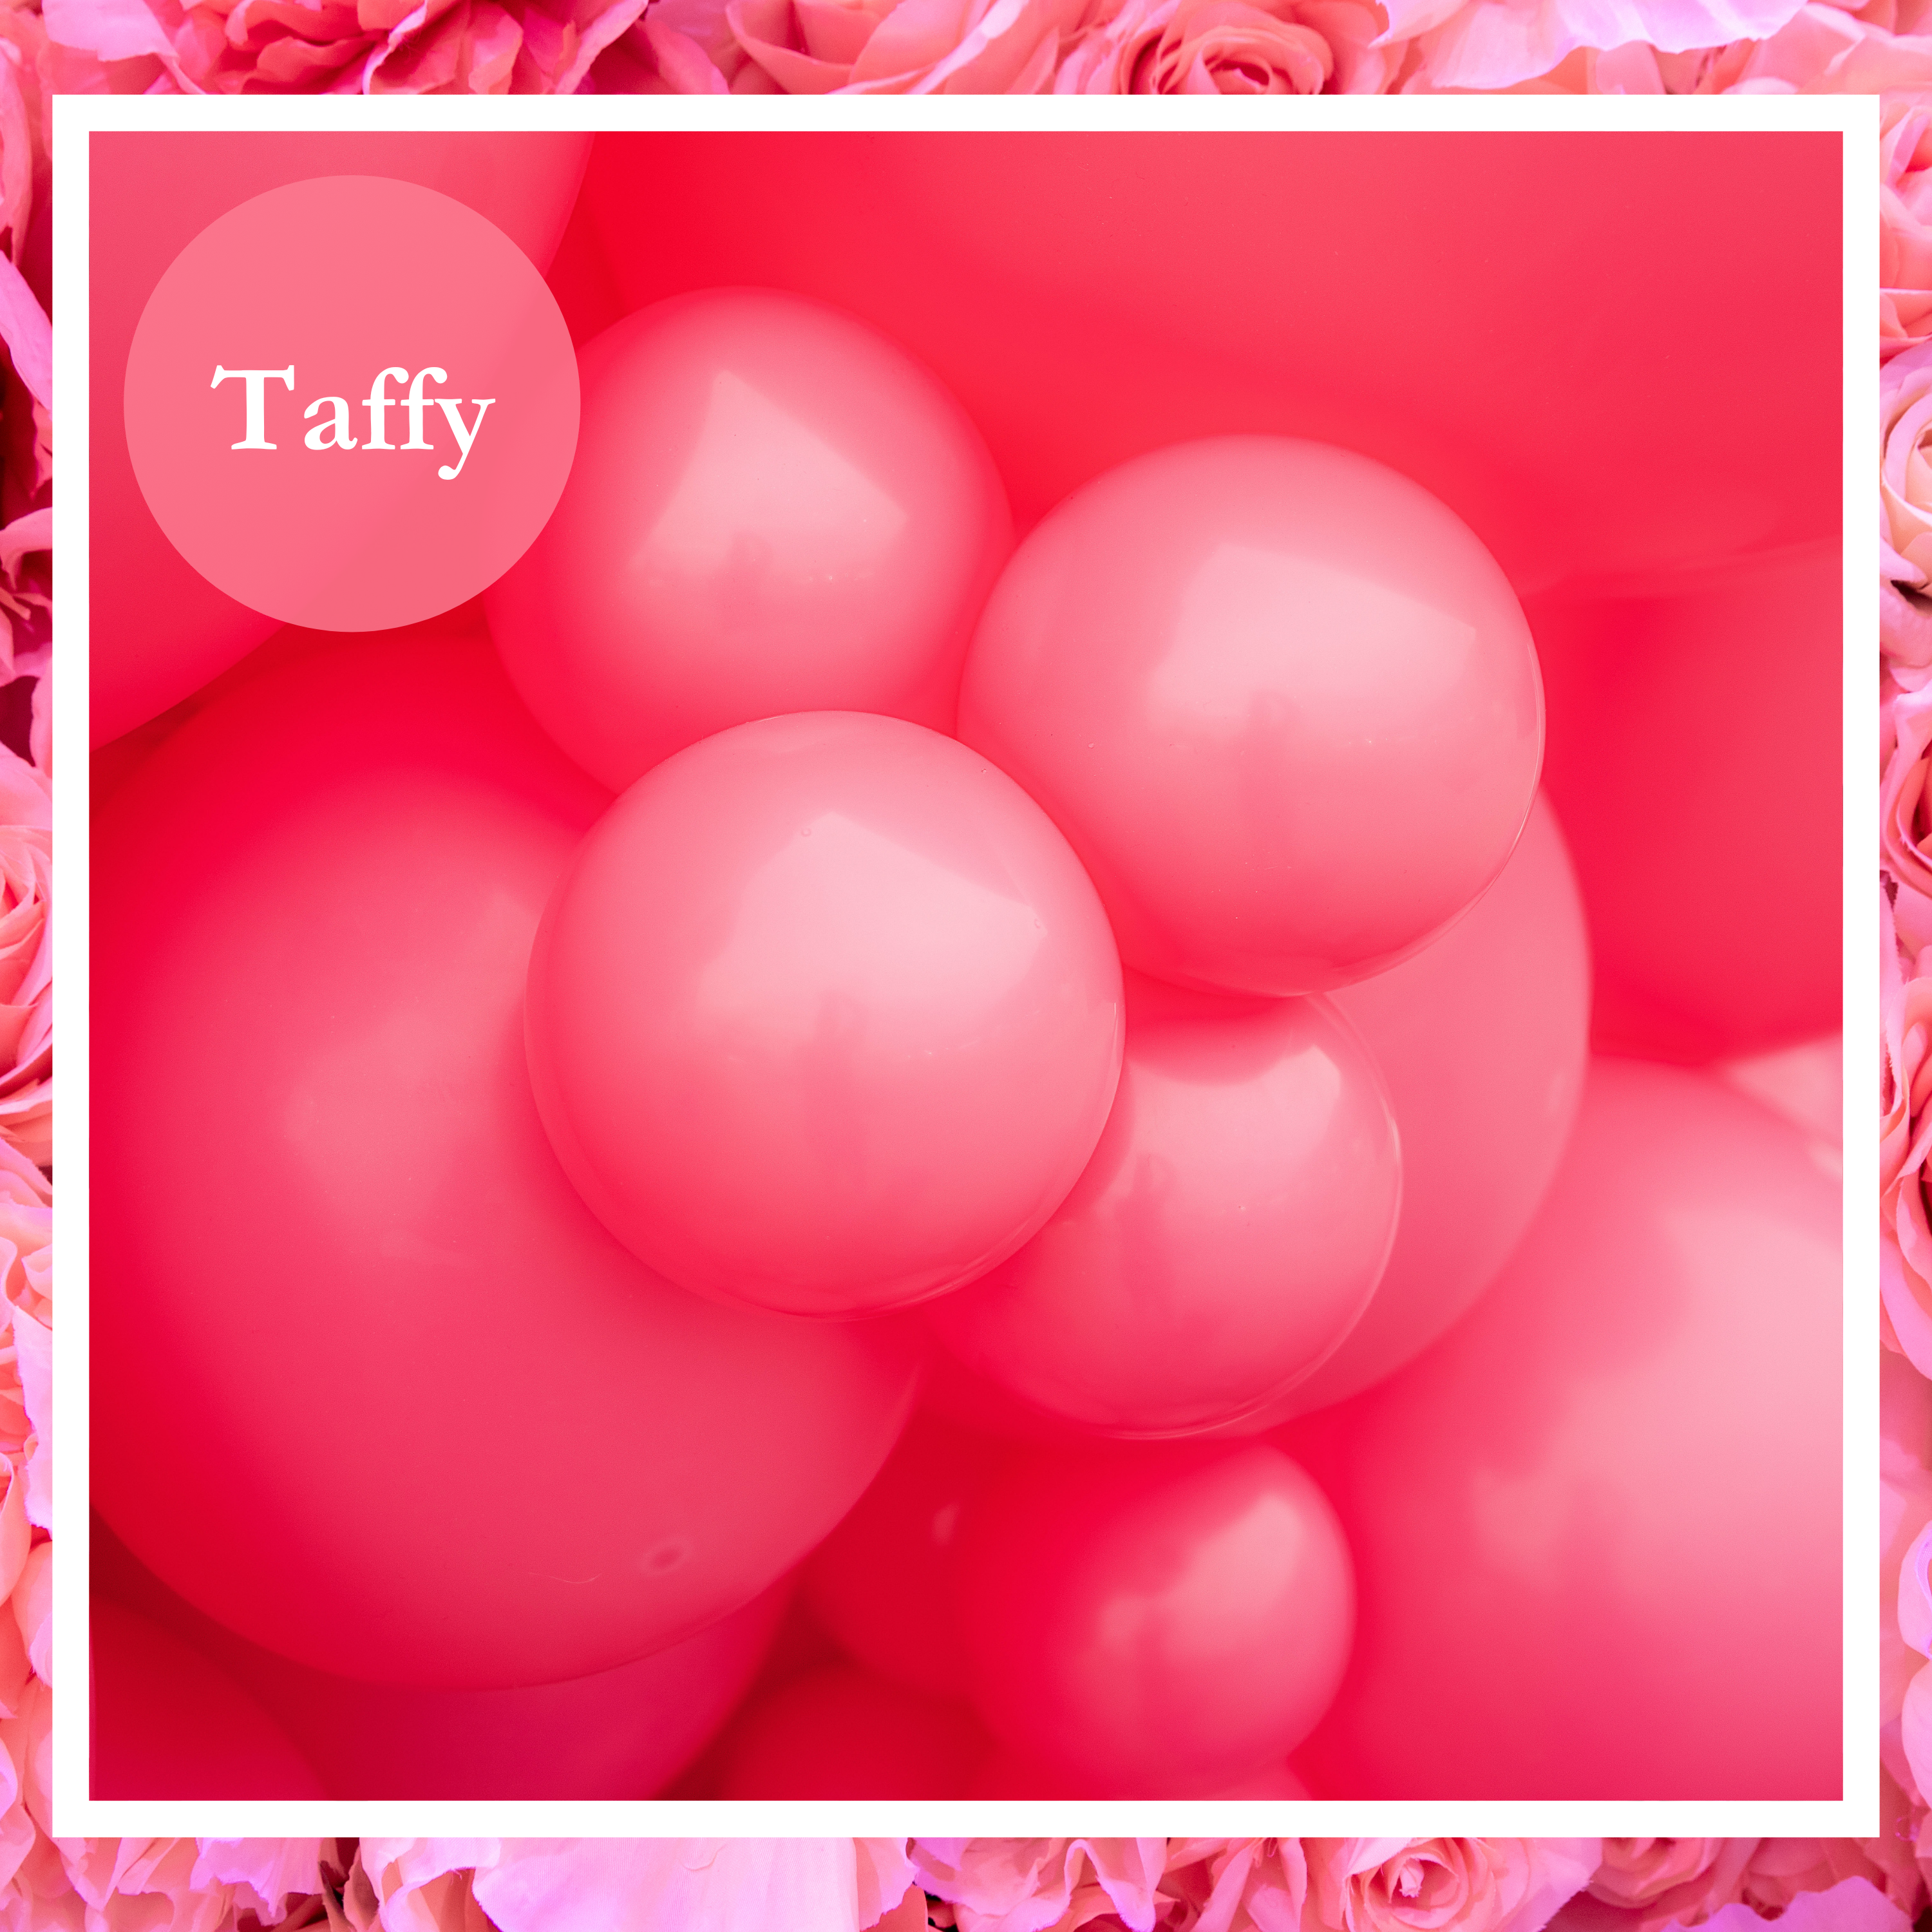 24" TUFTEX Taffy - Coral Pink Latex Balloons | 25 Count